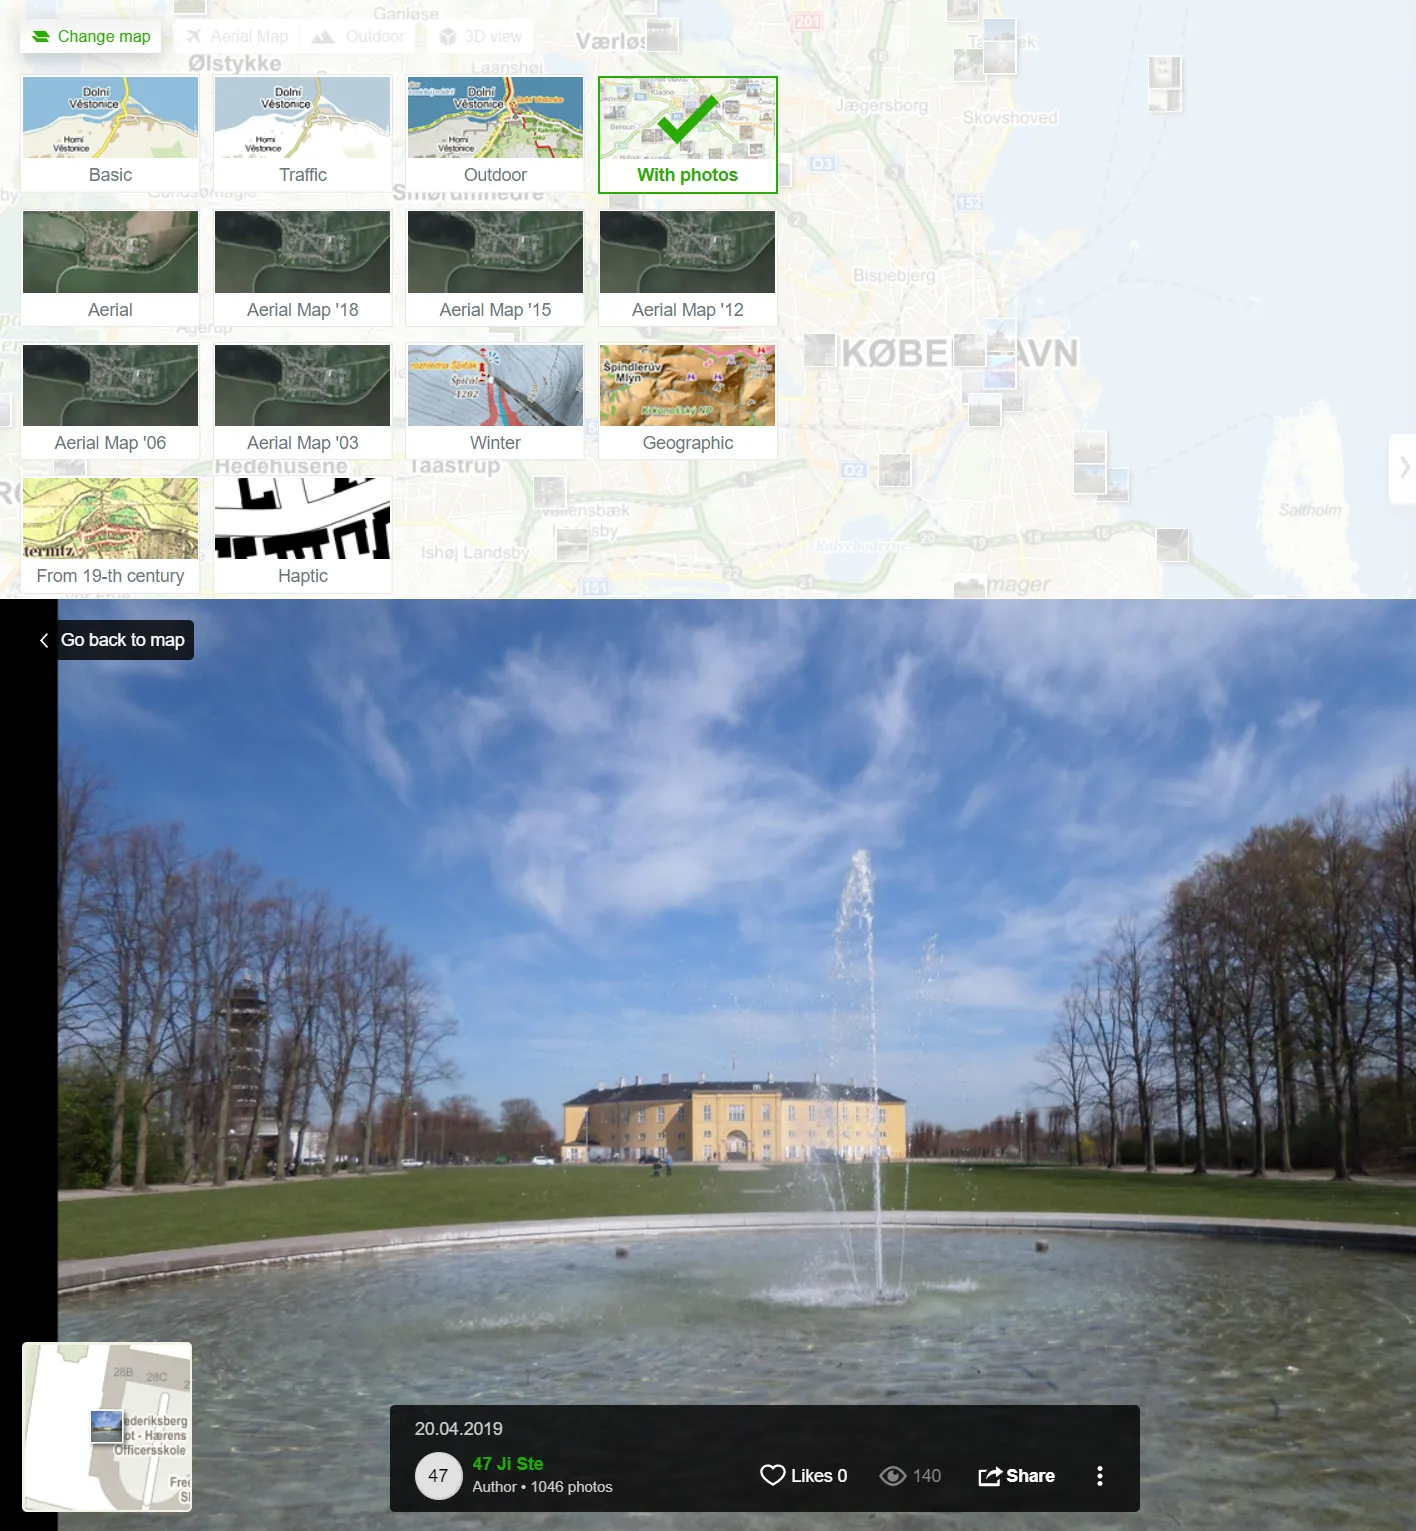 Mapy.cz map with photos